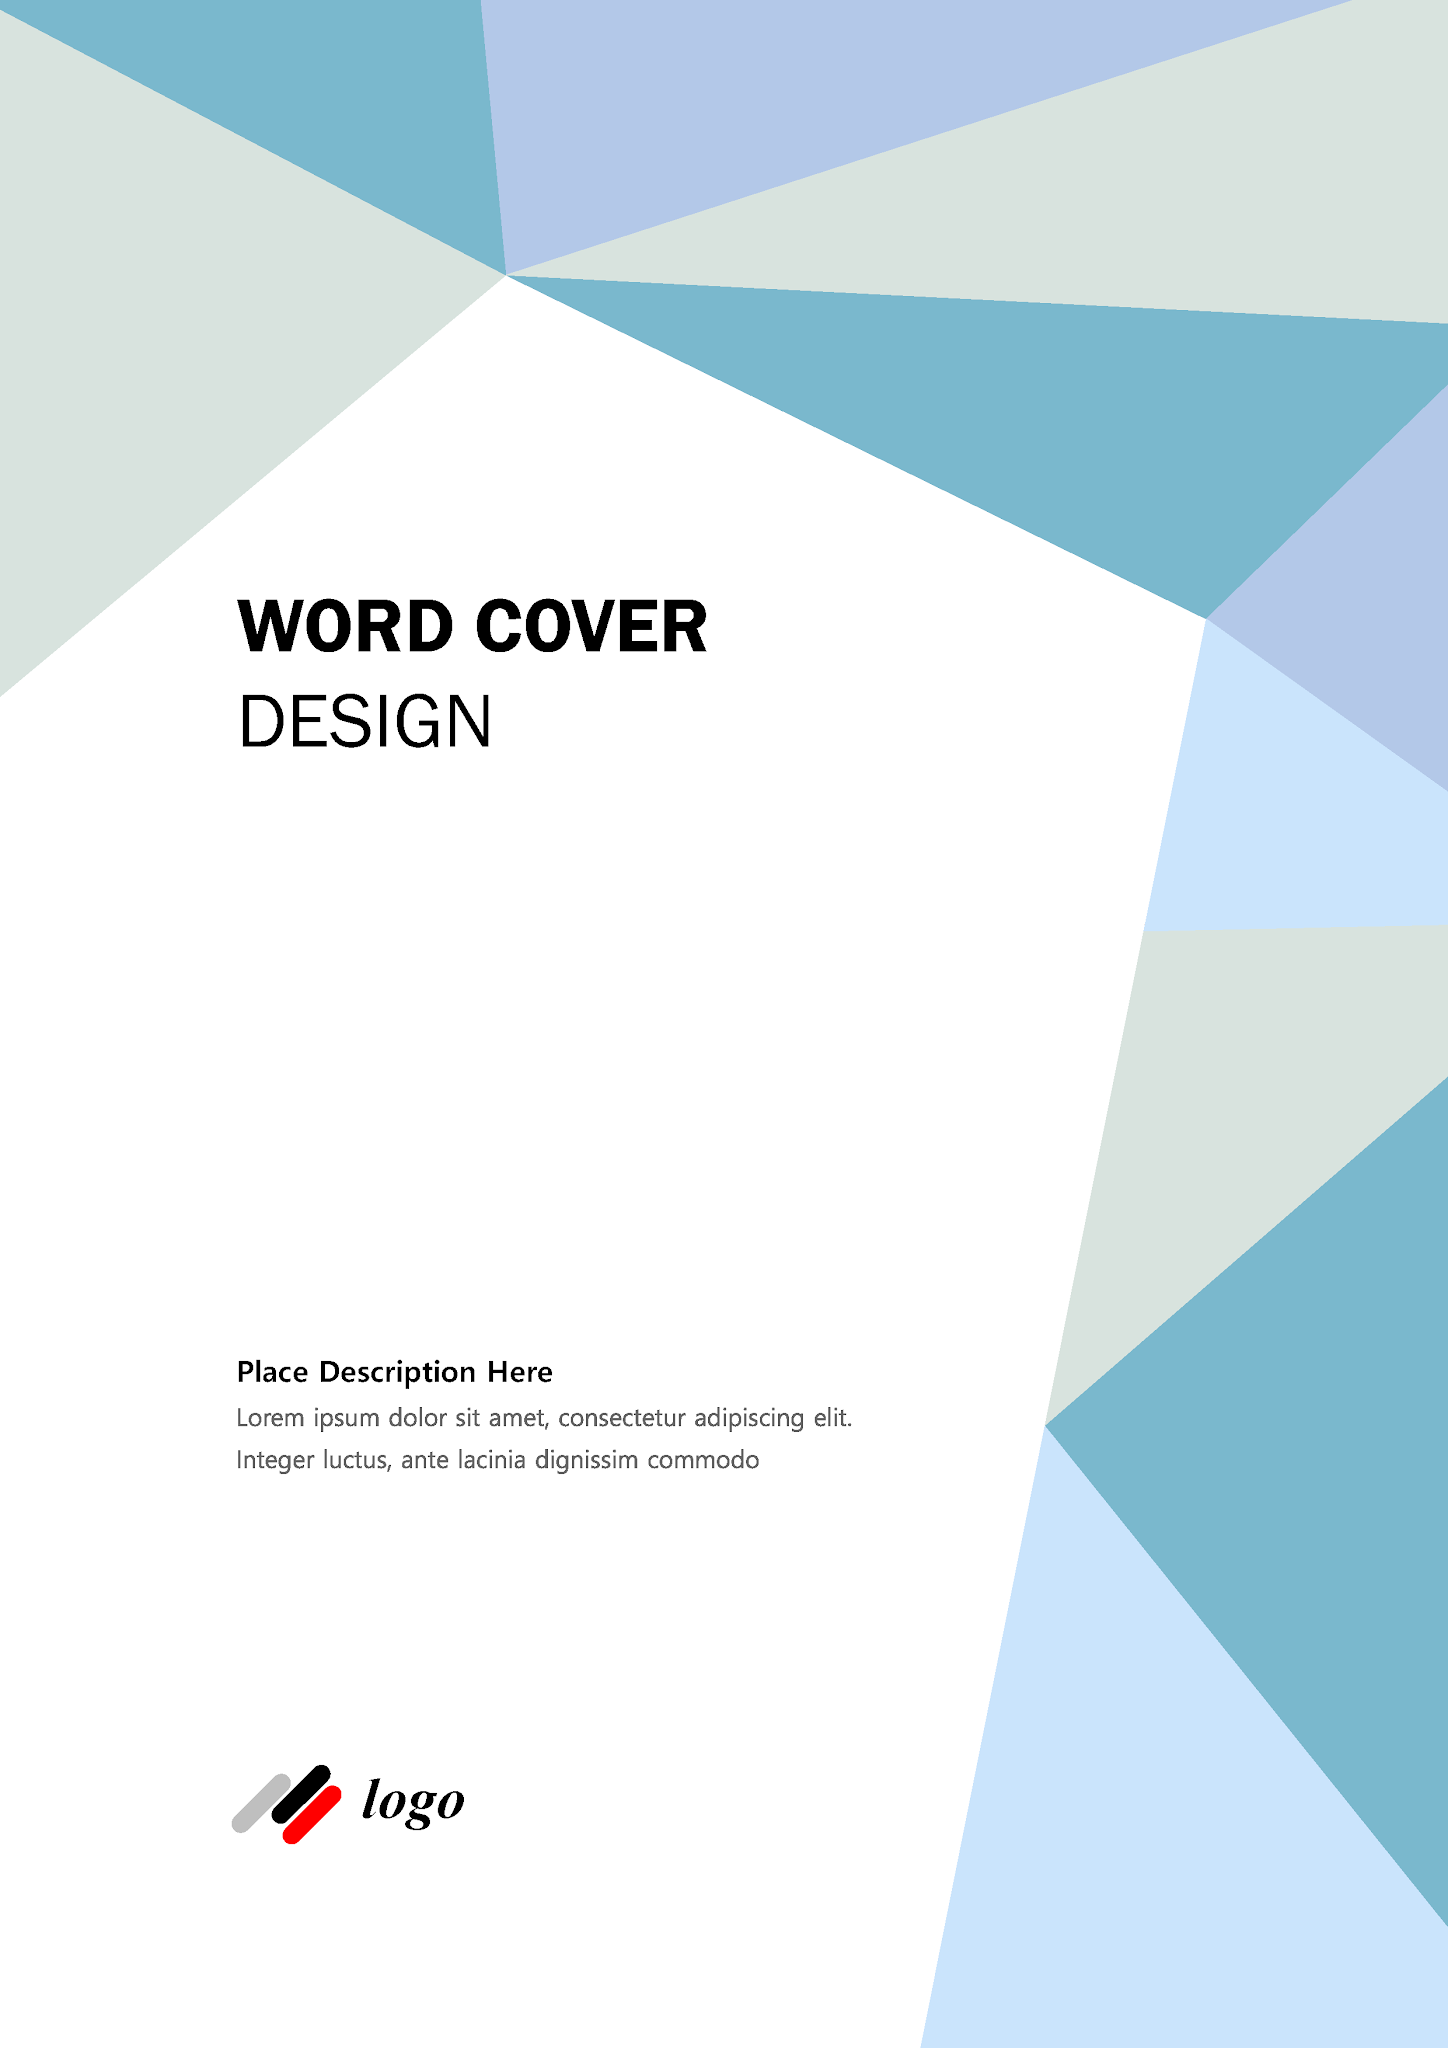 Microsoft Word Cover Templates 08 Free Download Brochure Design ...